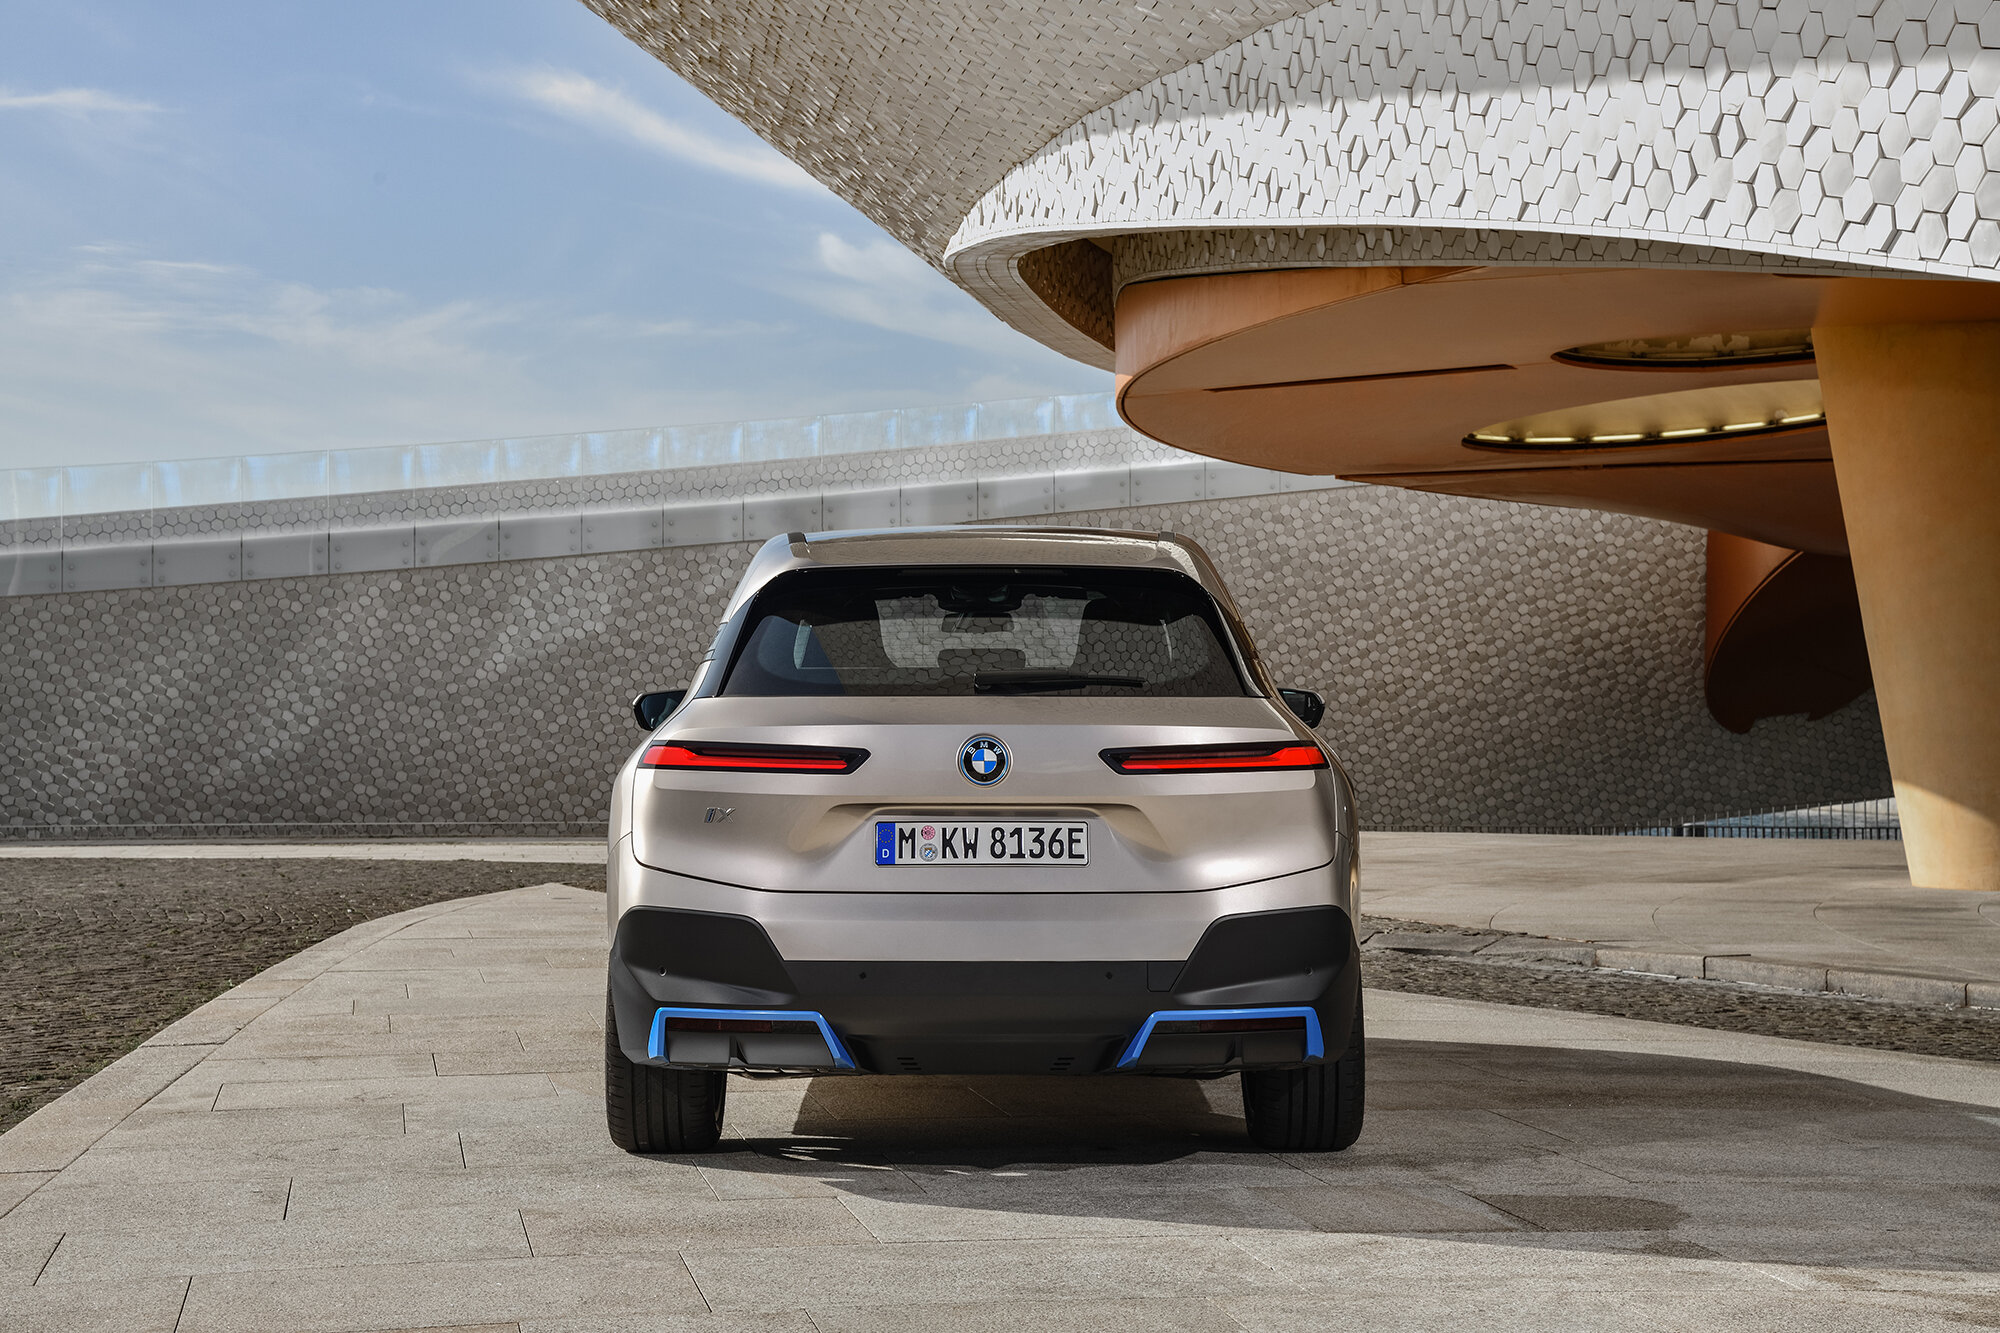 The rear of the new BMW iX